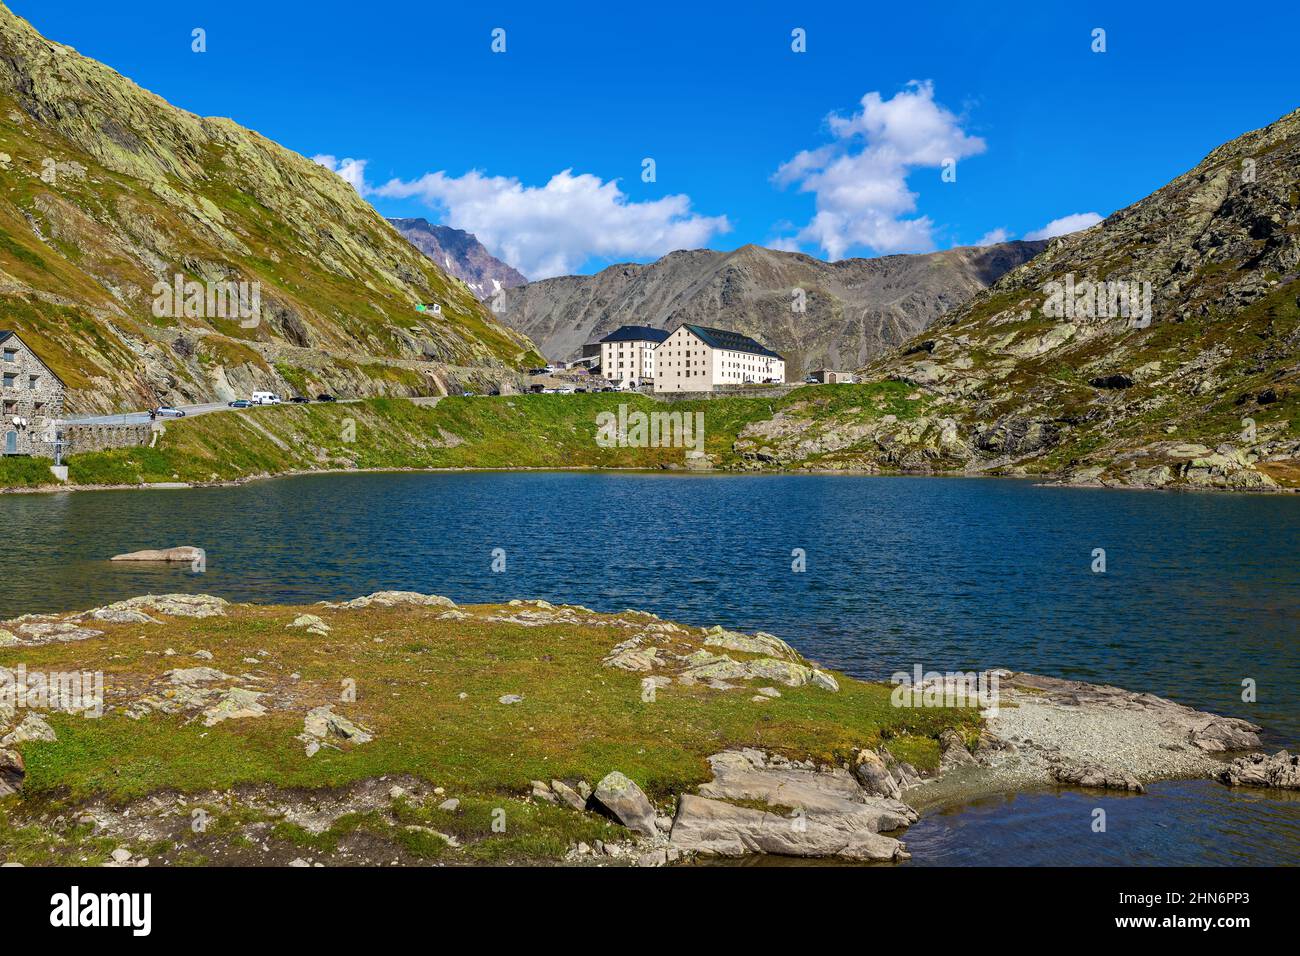 Small alpine lake among mountains under blue sky at the Great St Bernard mountain pass on the border between Italy and Switzerland. Stock Photo